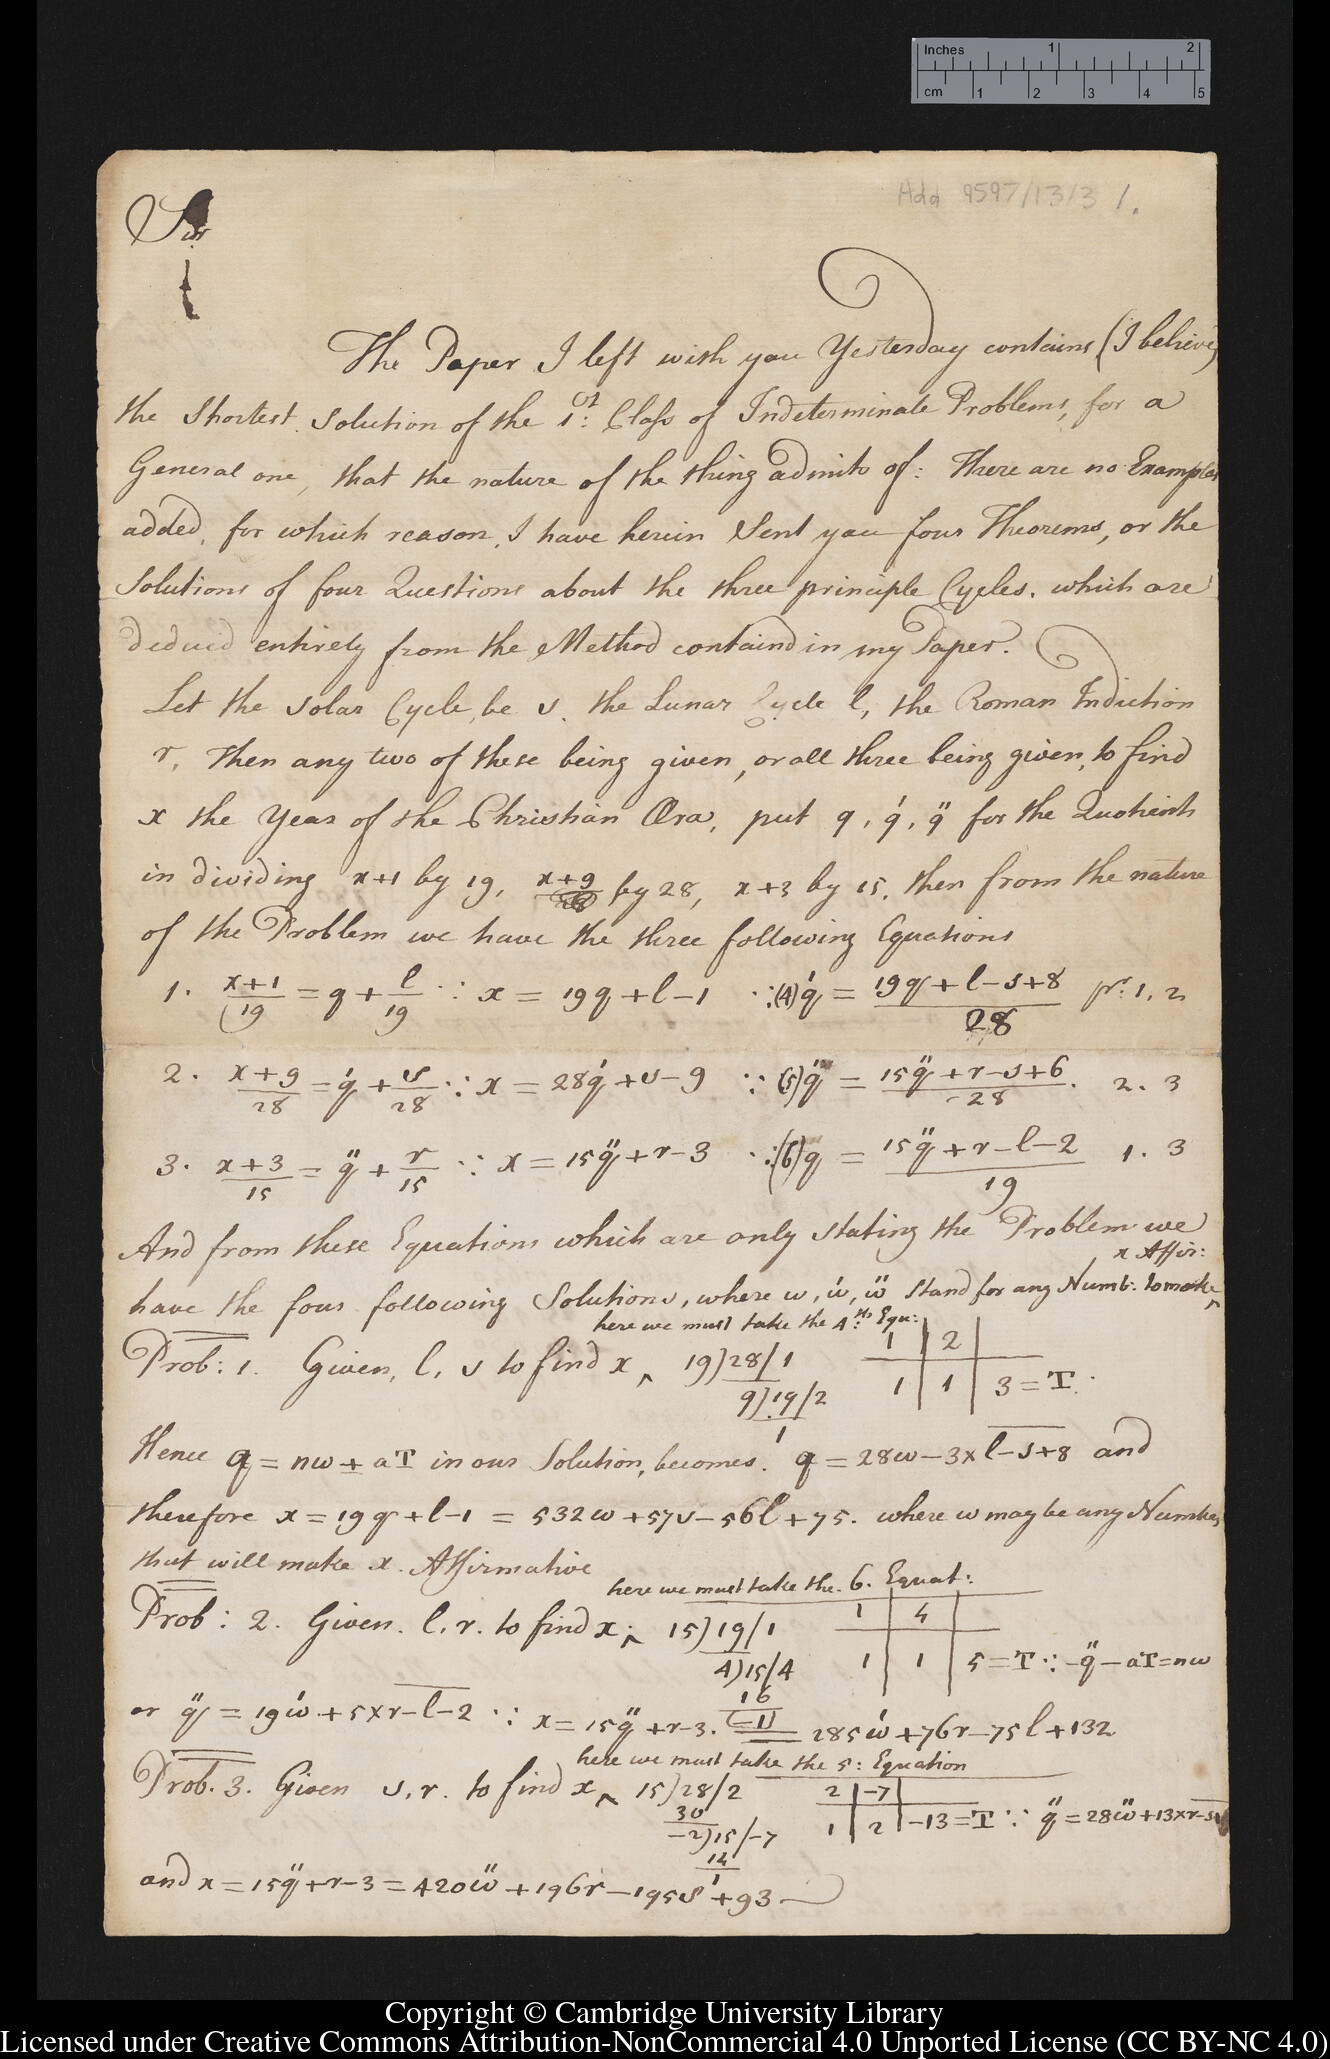 Letter from George Anderson, probably to William Jones